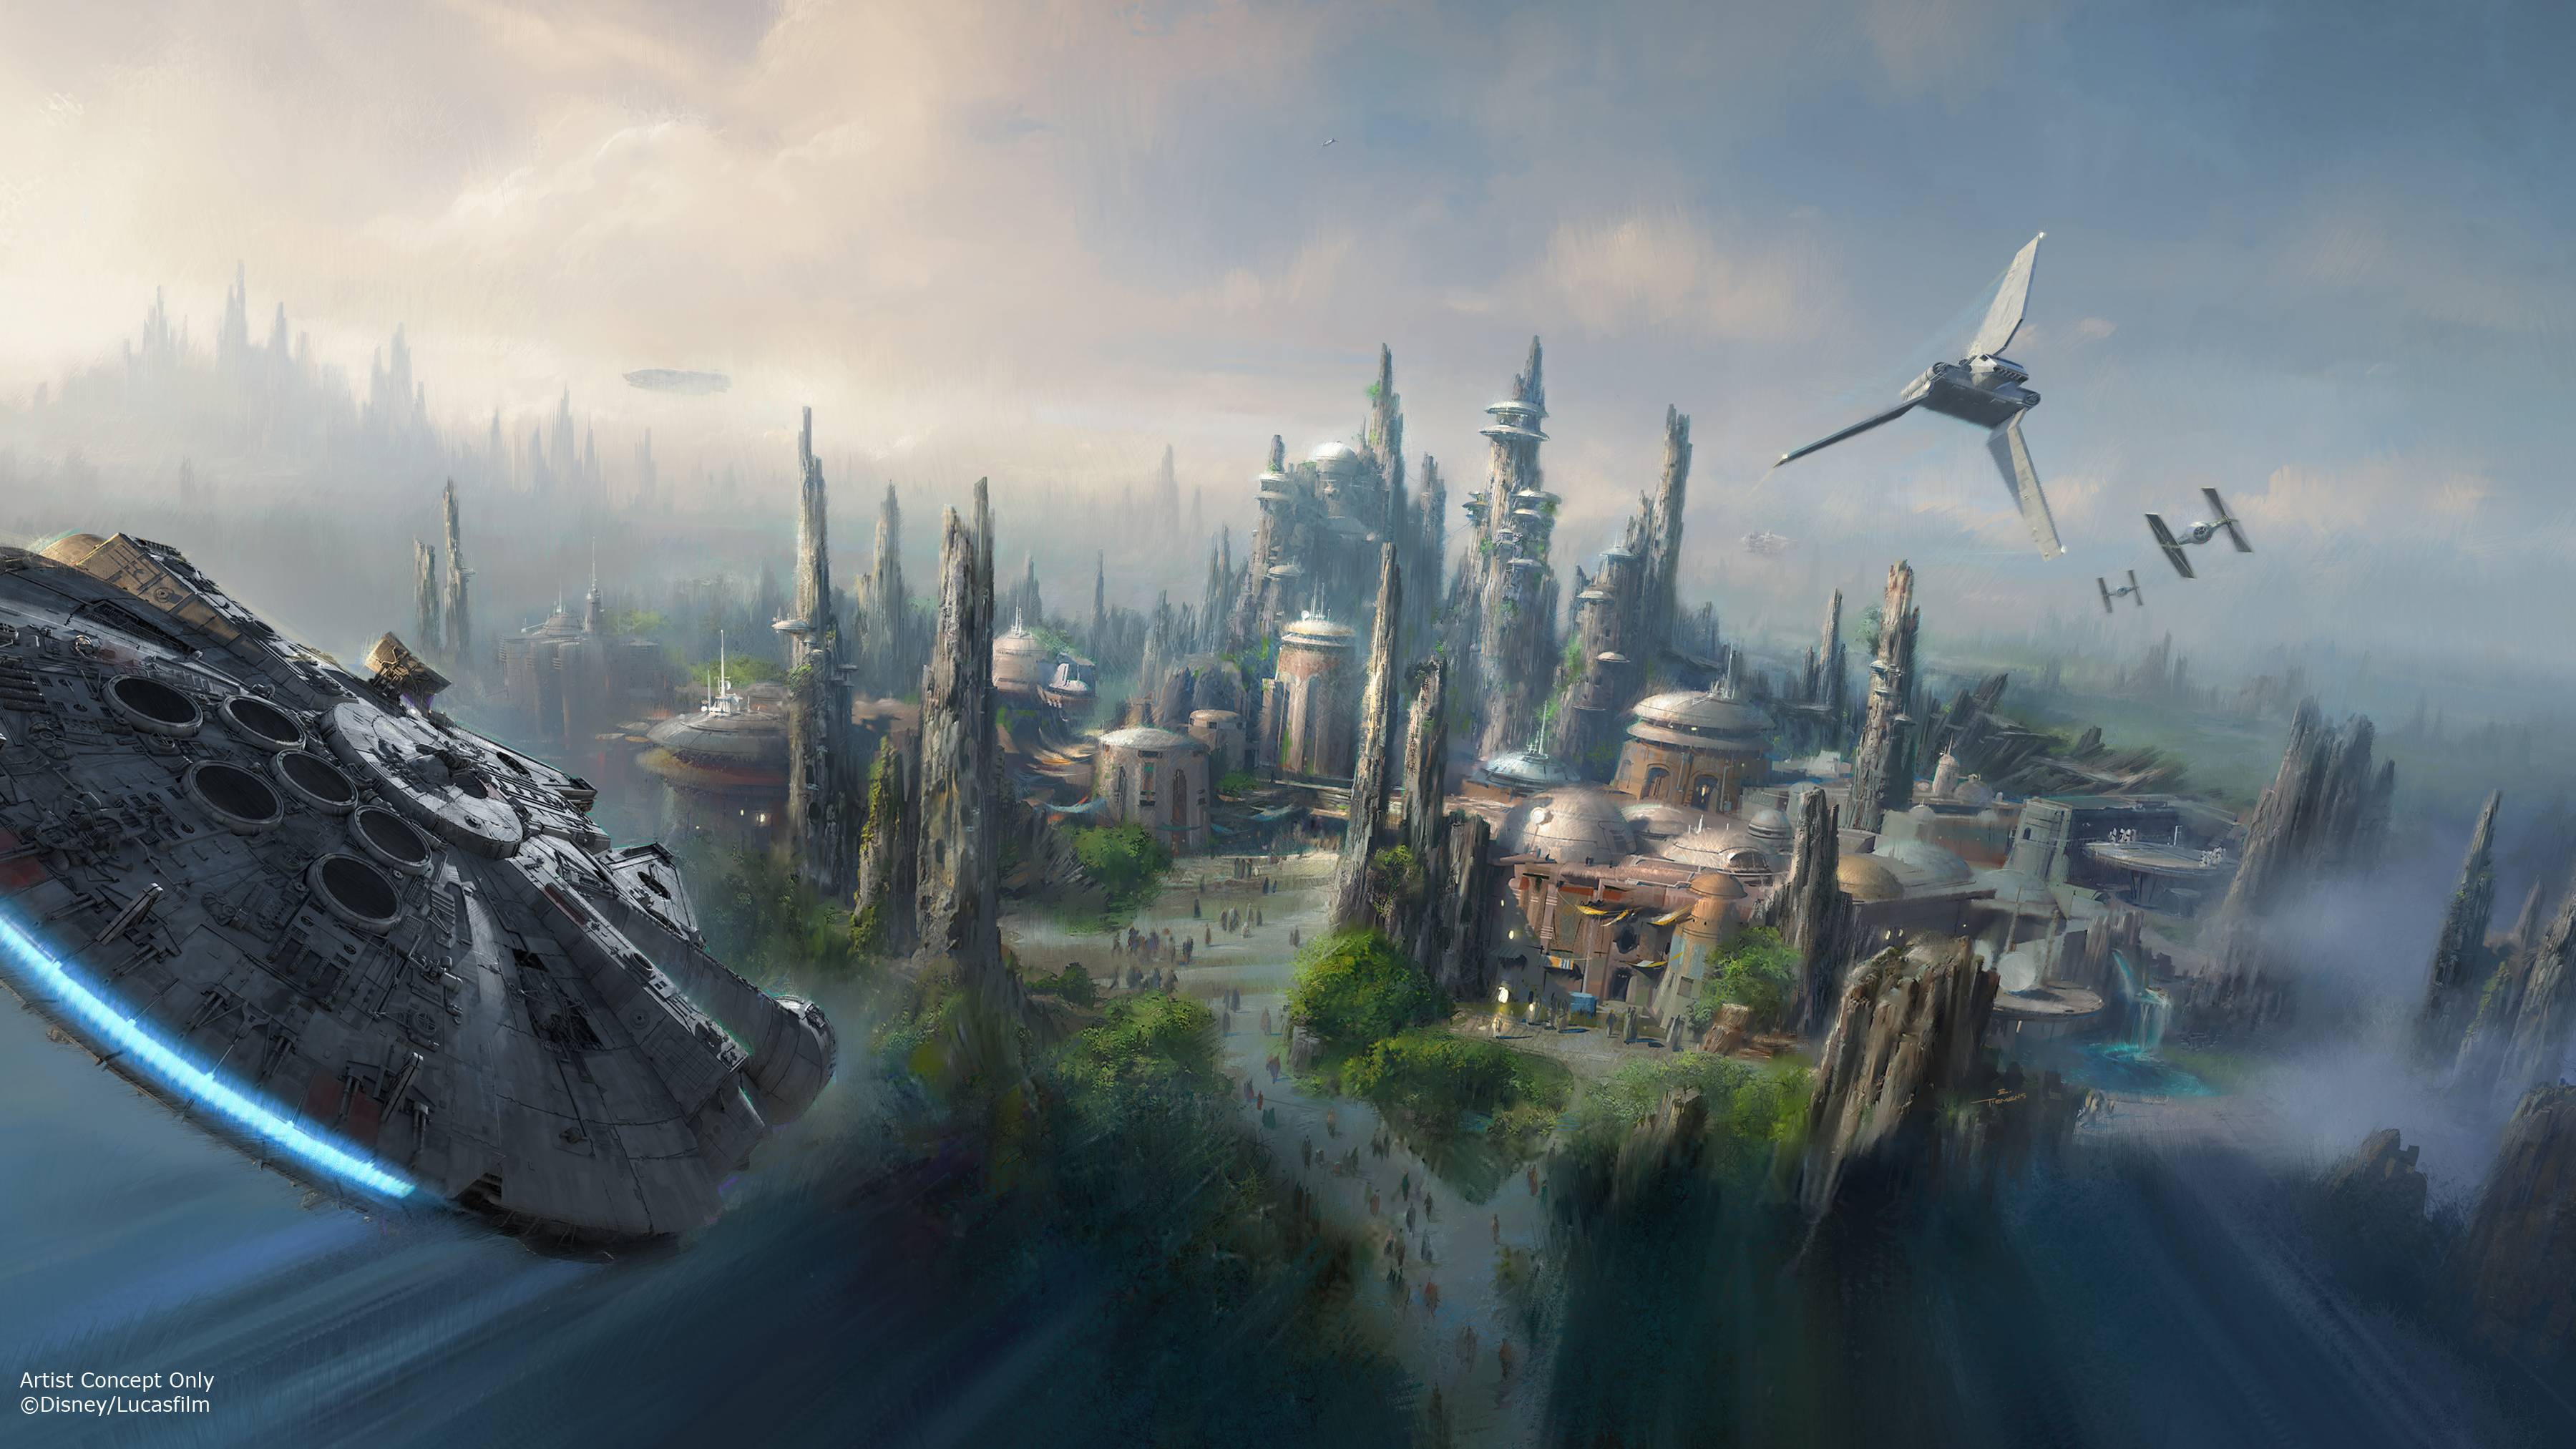 Star Wars themed land concept art - Photo 3 of 6